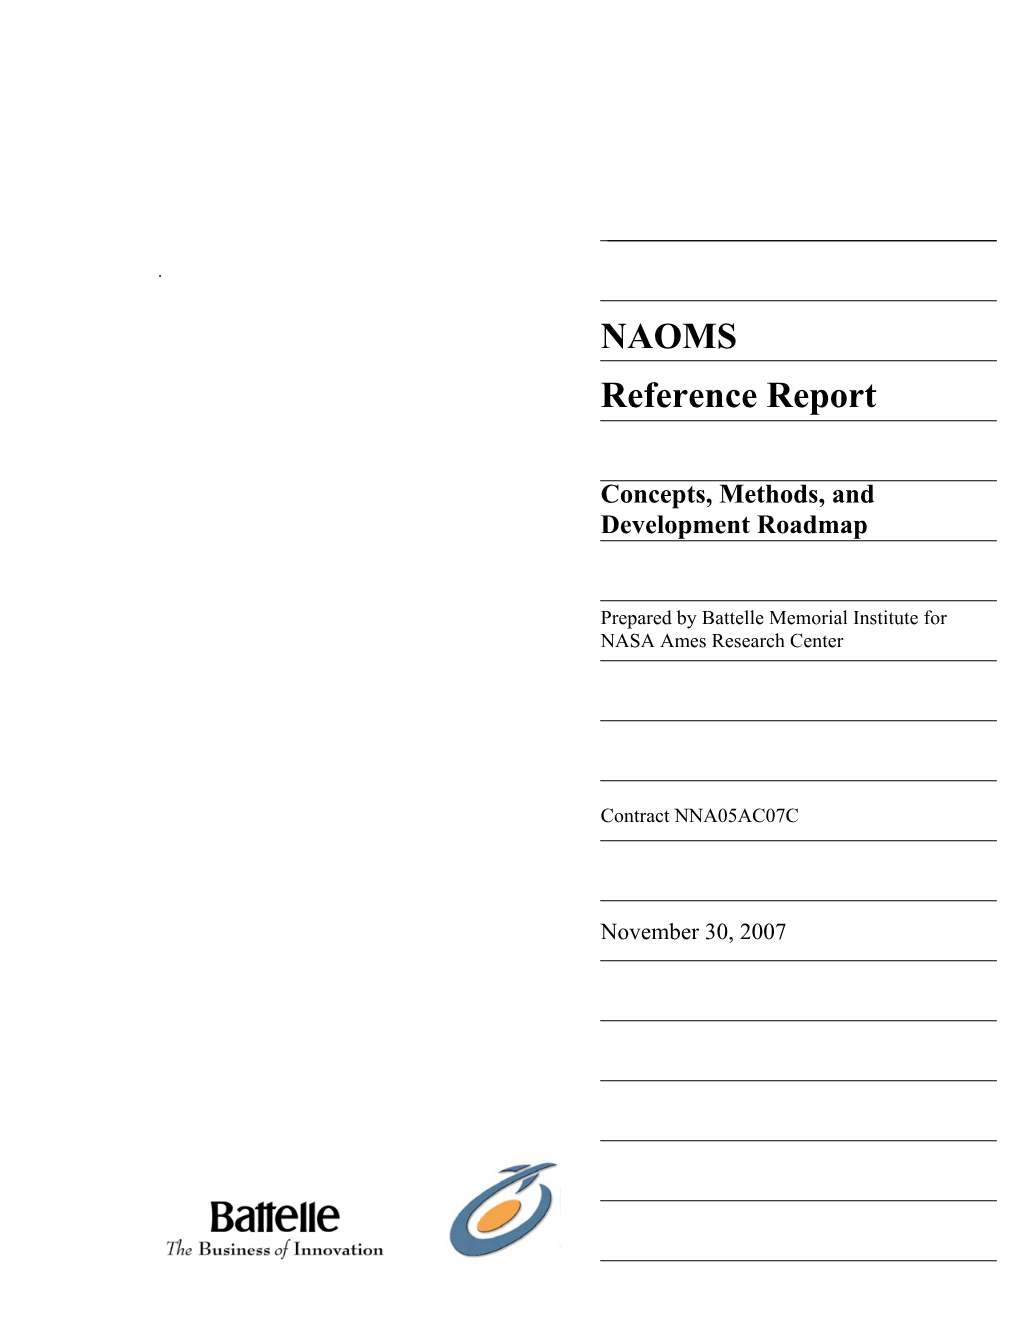 NAOMS Reference Report